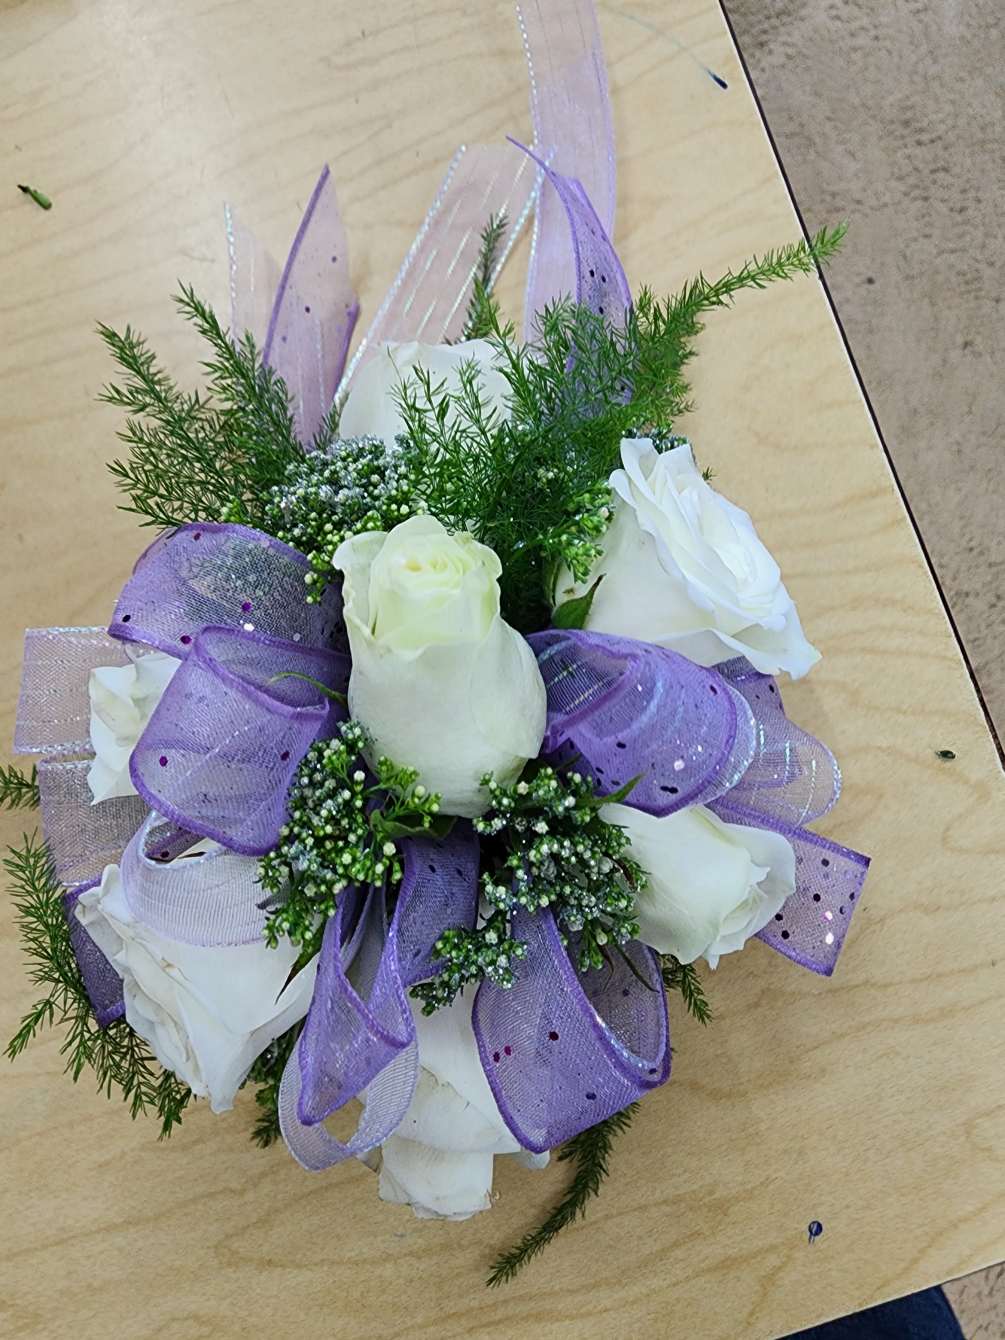 The Sweetest white spray roses, lavender ribbon, white and silver accents with